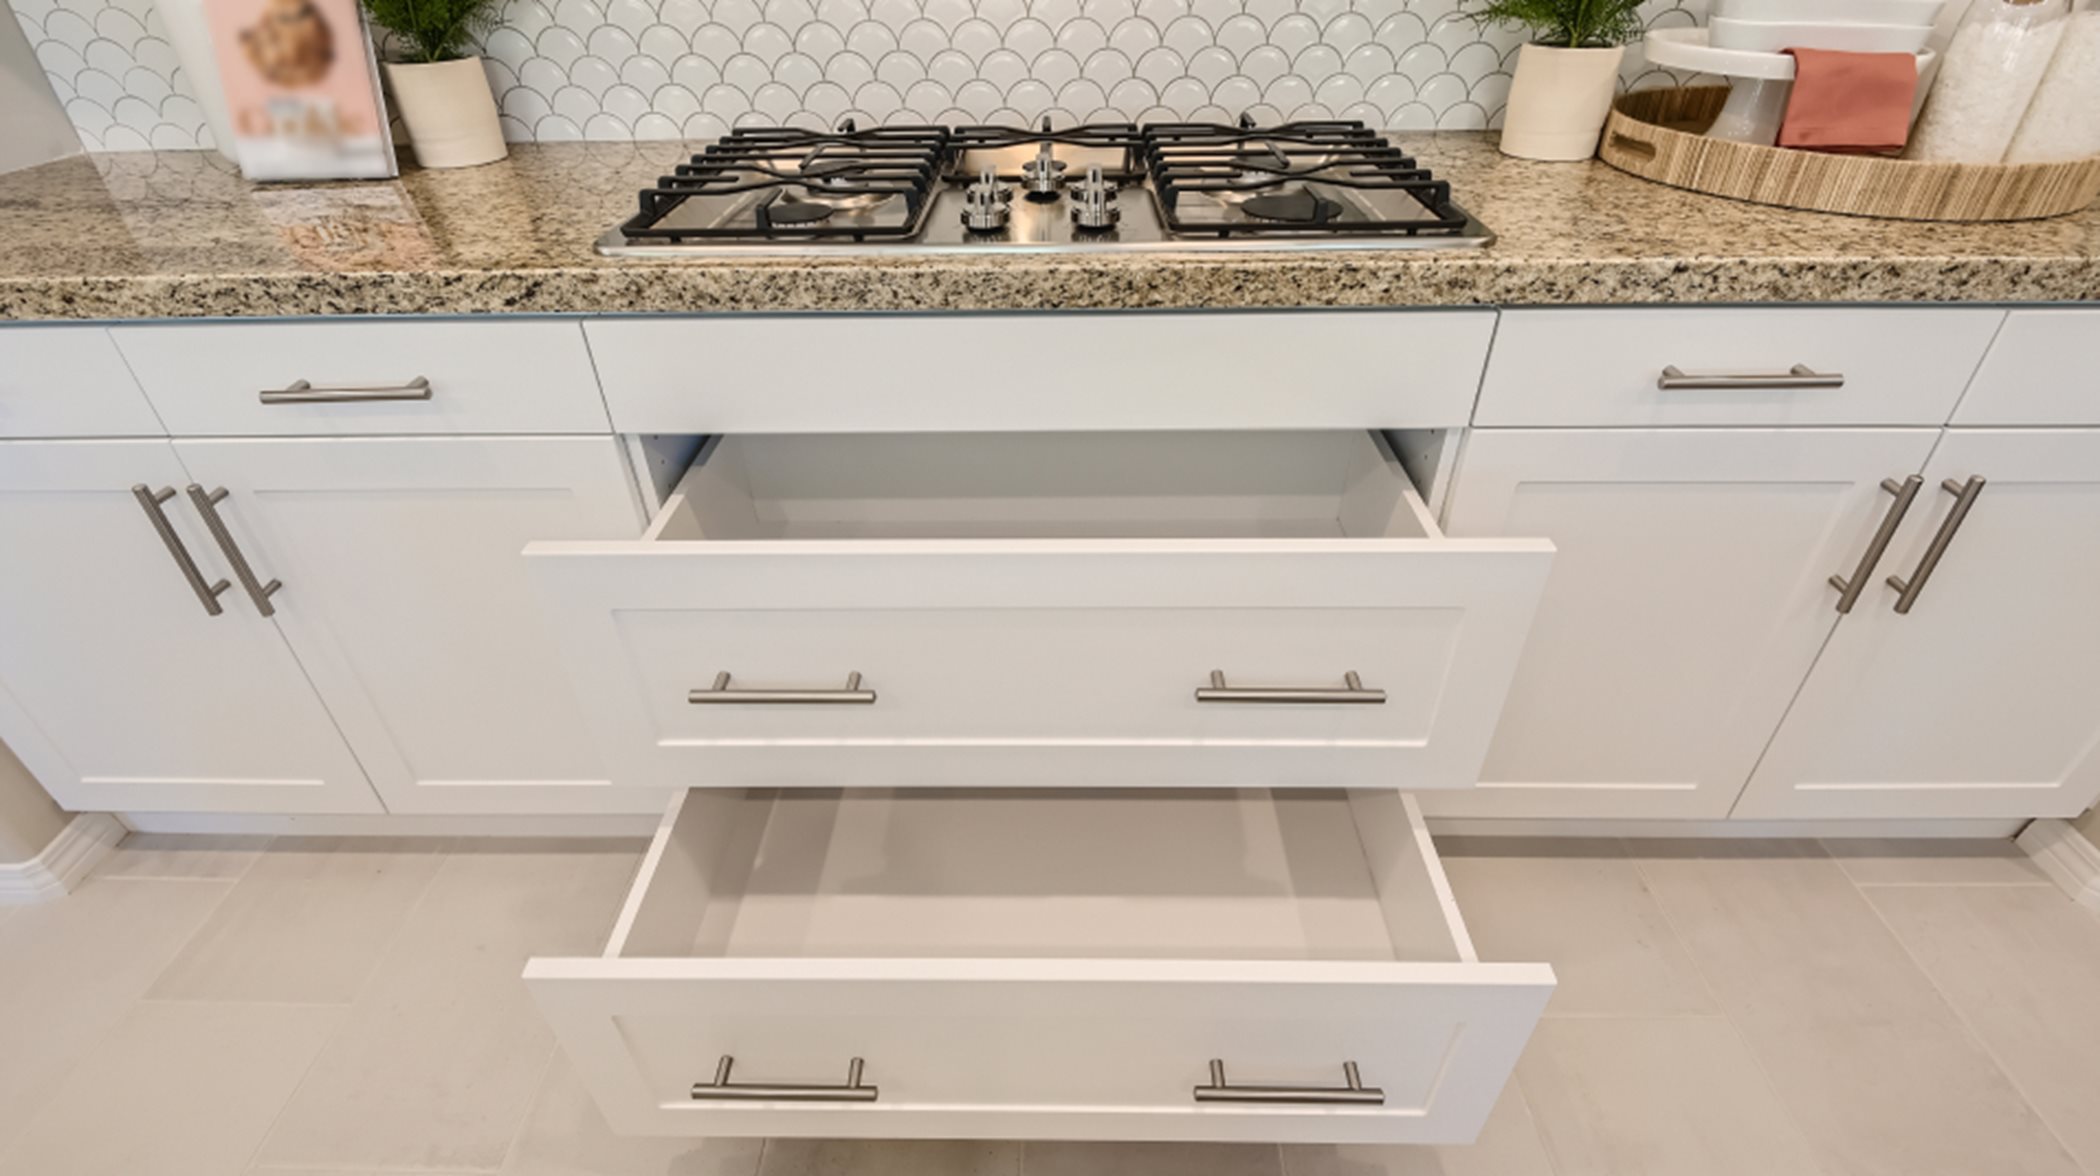 Open drawers in the kitchen